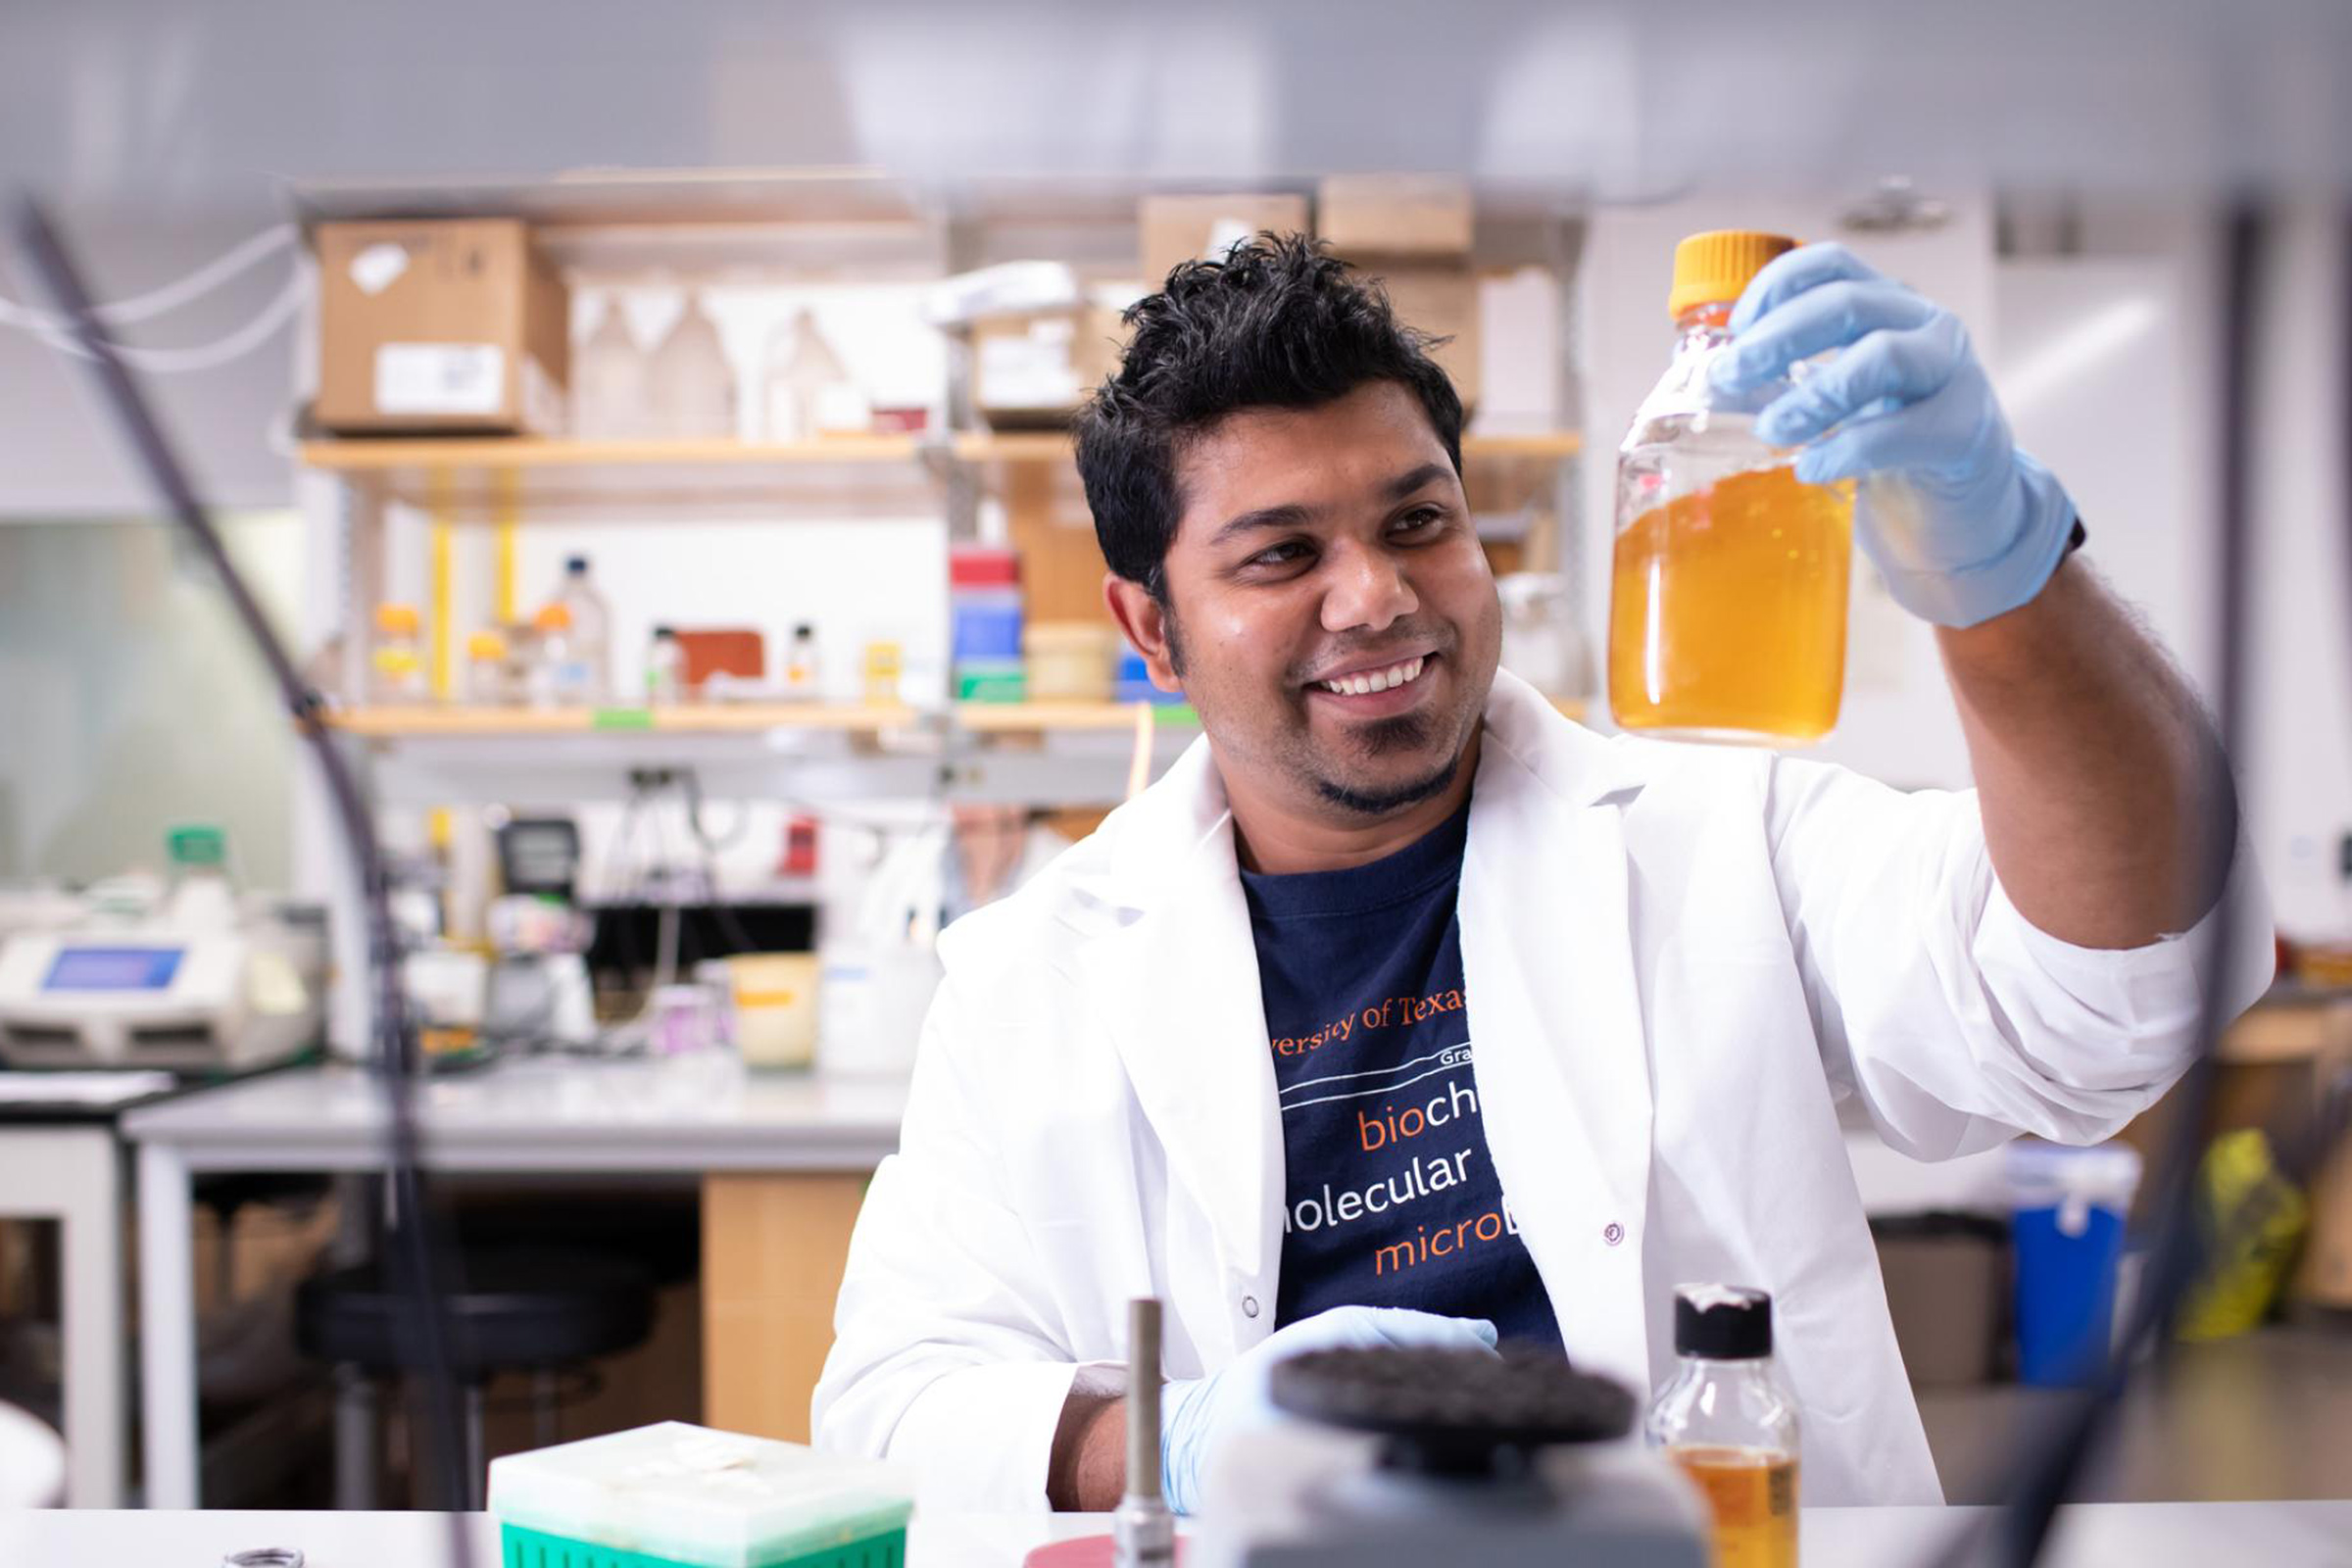 A graduate student in a white lab coat and PPE smiles at a container he holds up to view